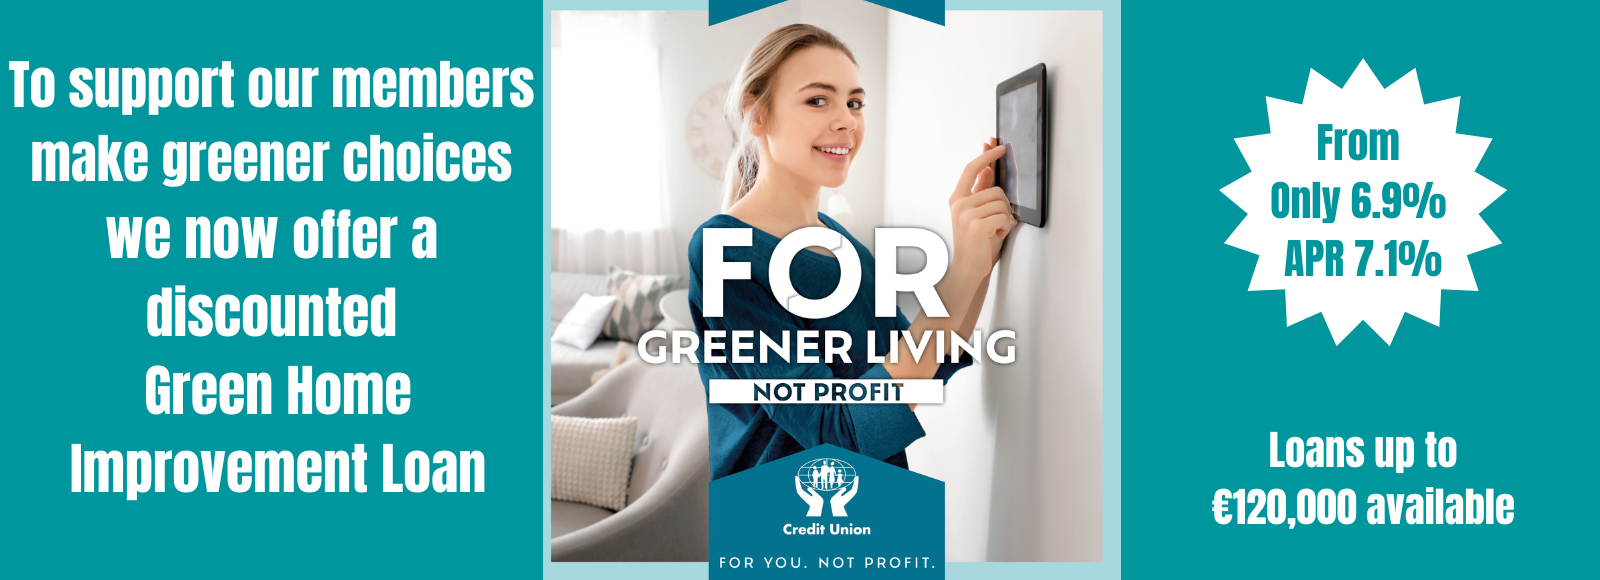 Blackrock Credit Union promoting green home improvement loans featuring girl using power controls on wall